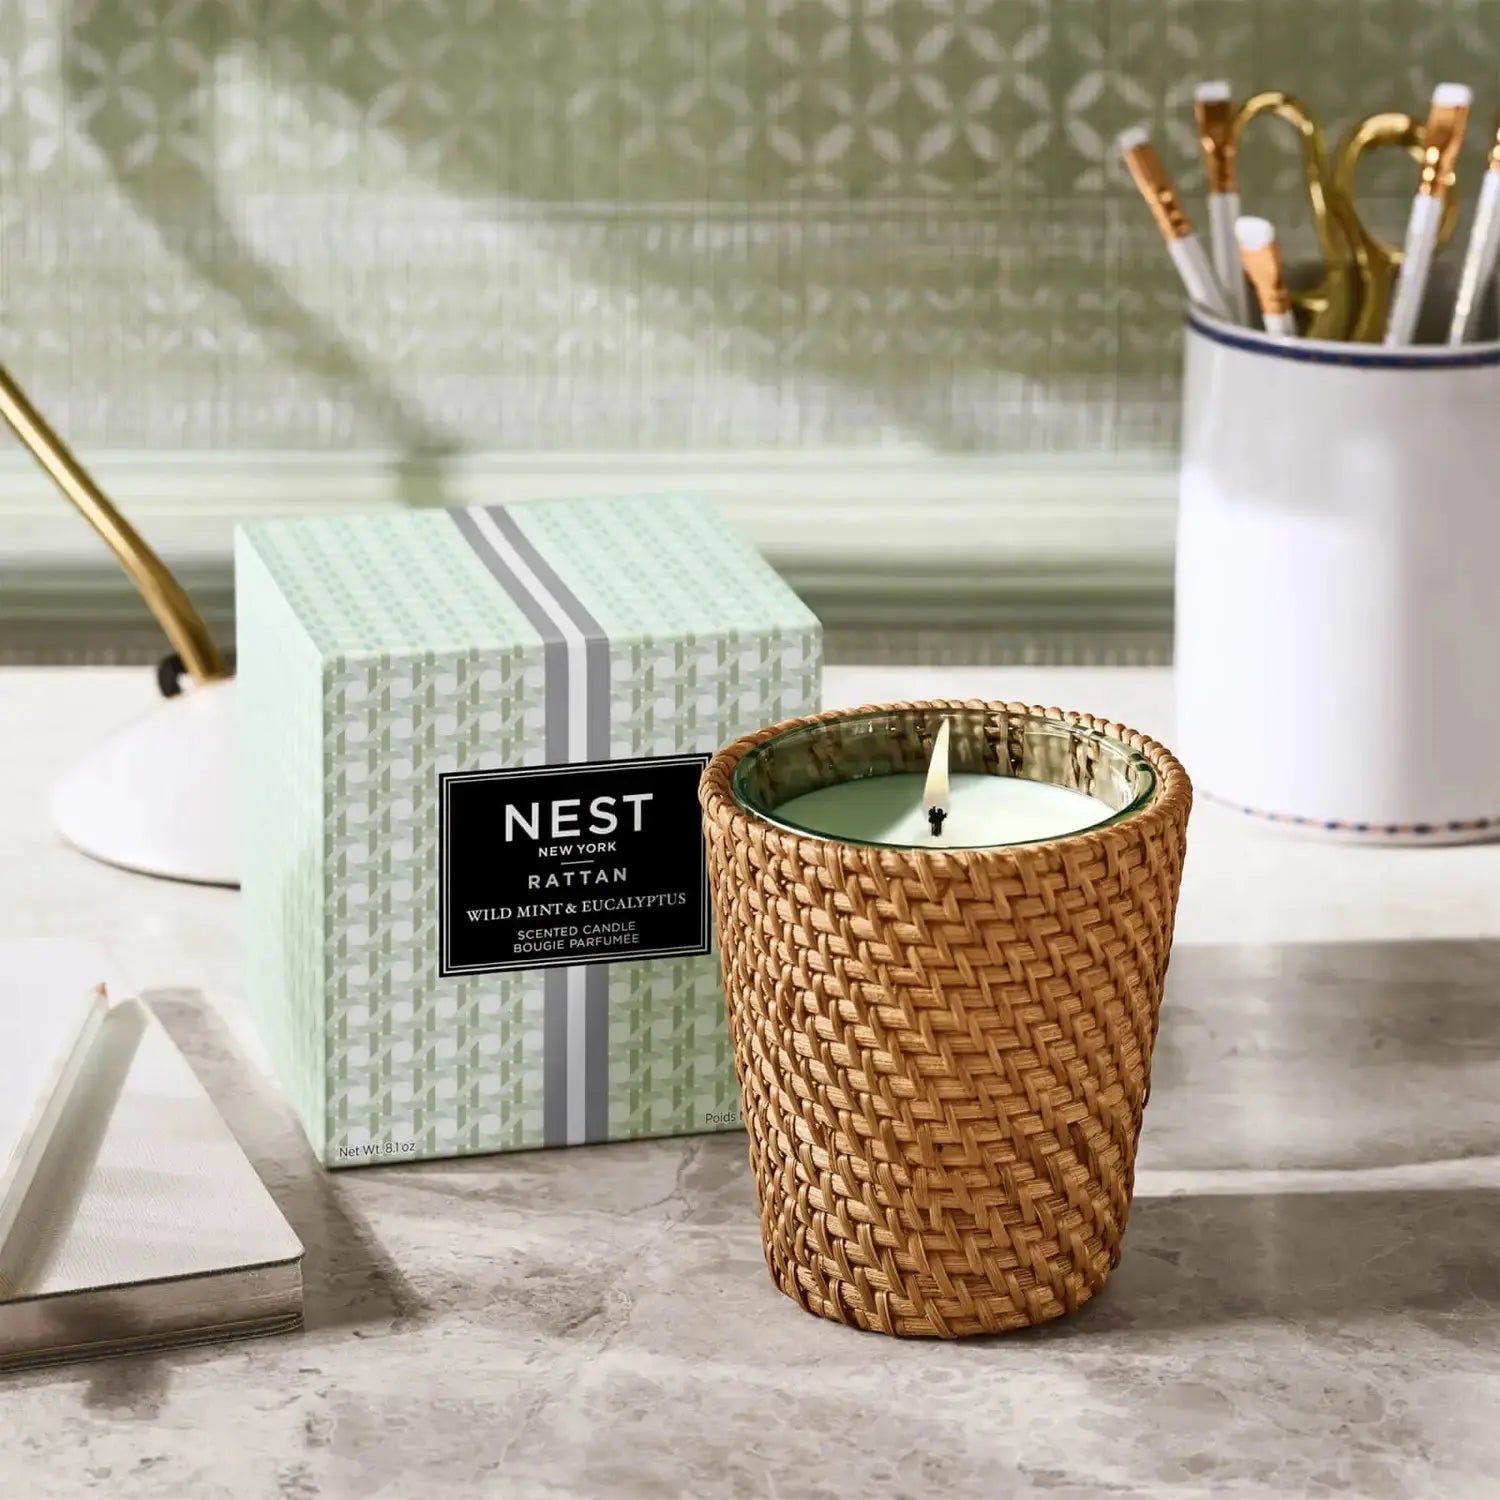 Nest Fragrances Wild Mint and Eucalyptus Rattan Classic 8.1 ounce Candle in a room